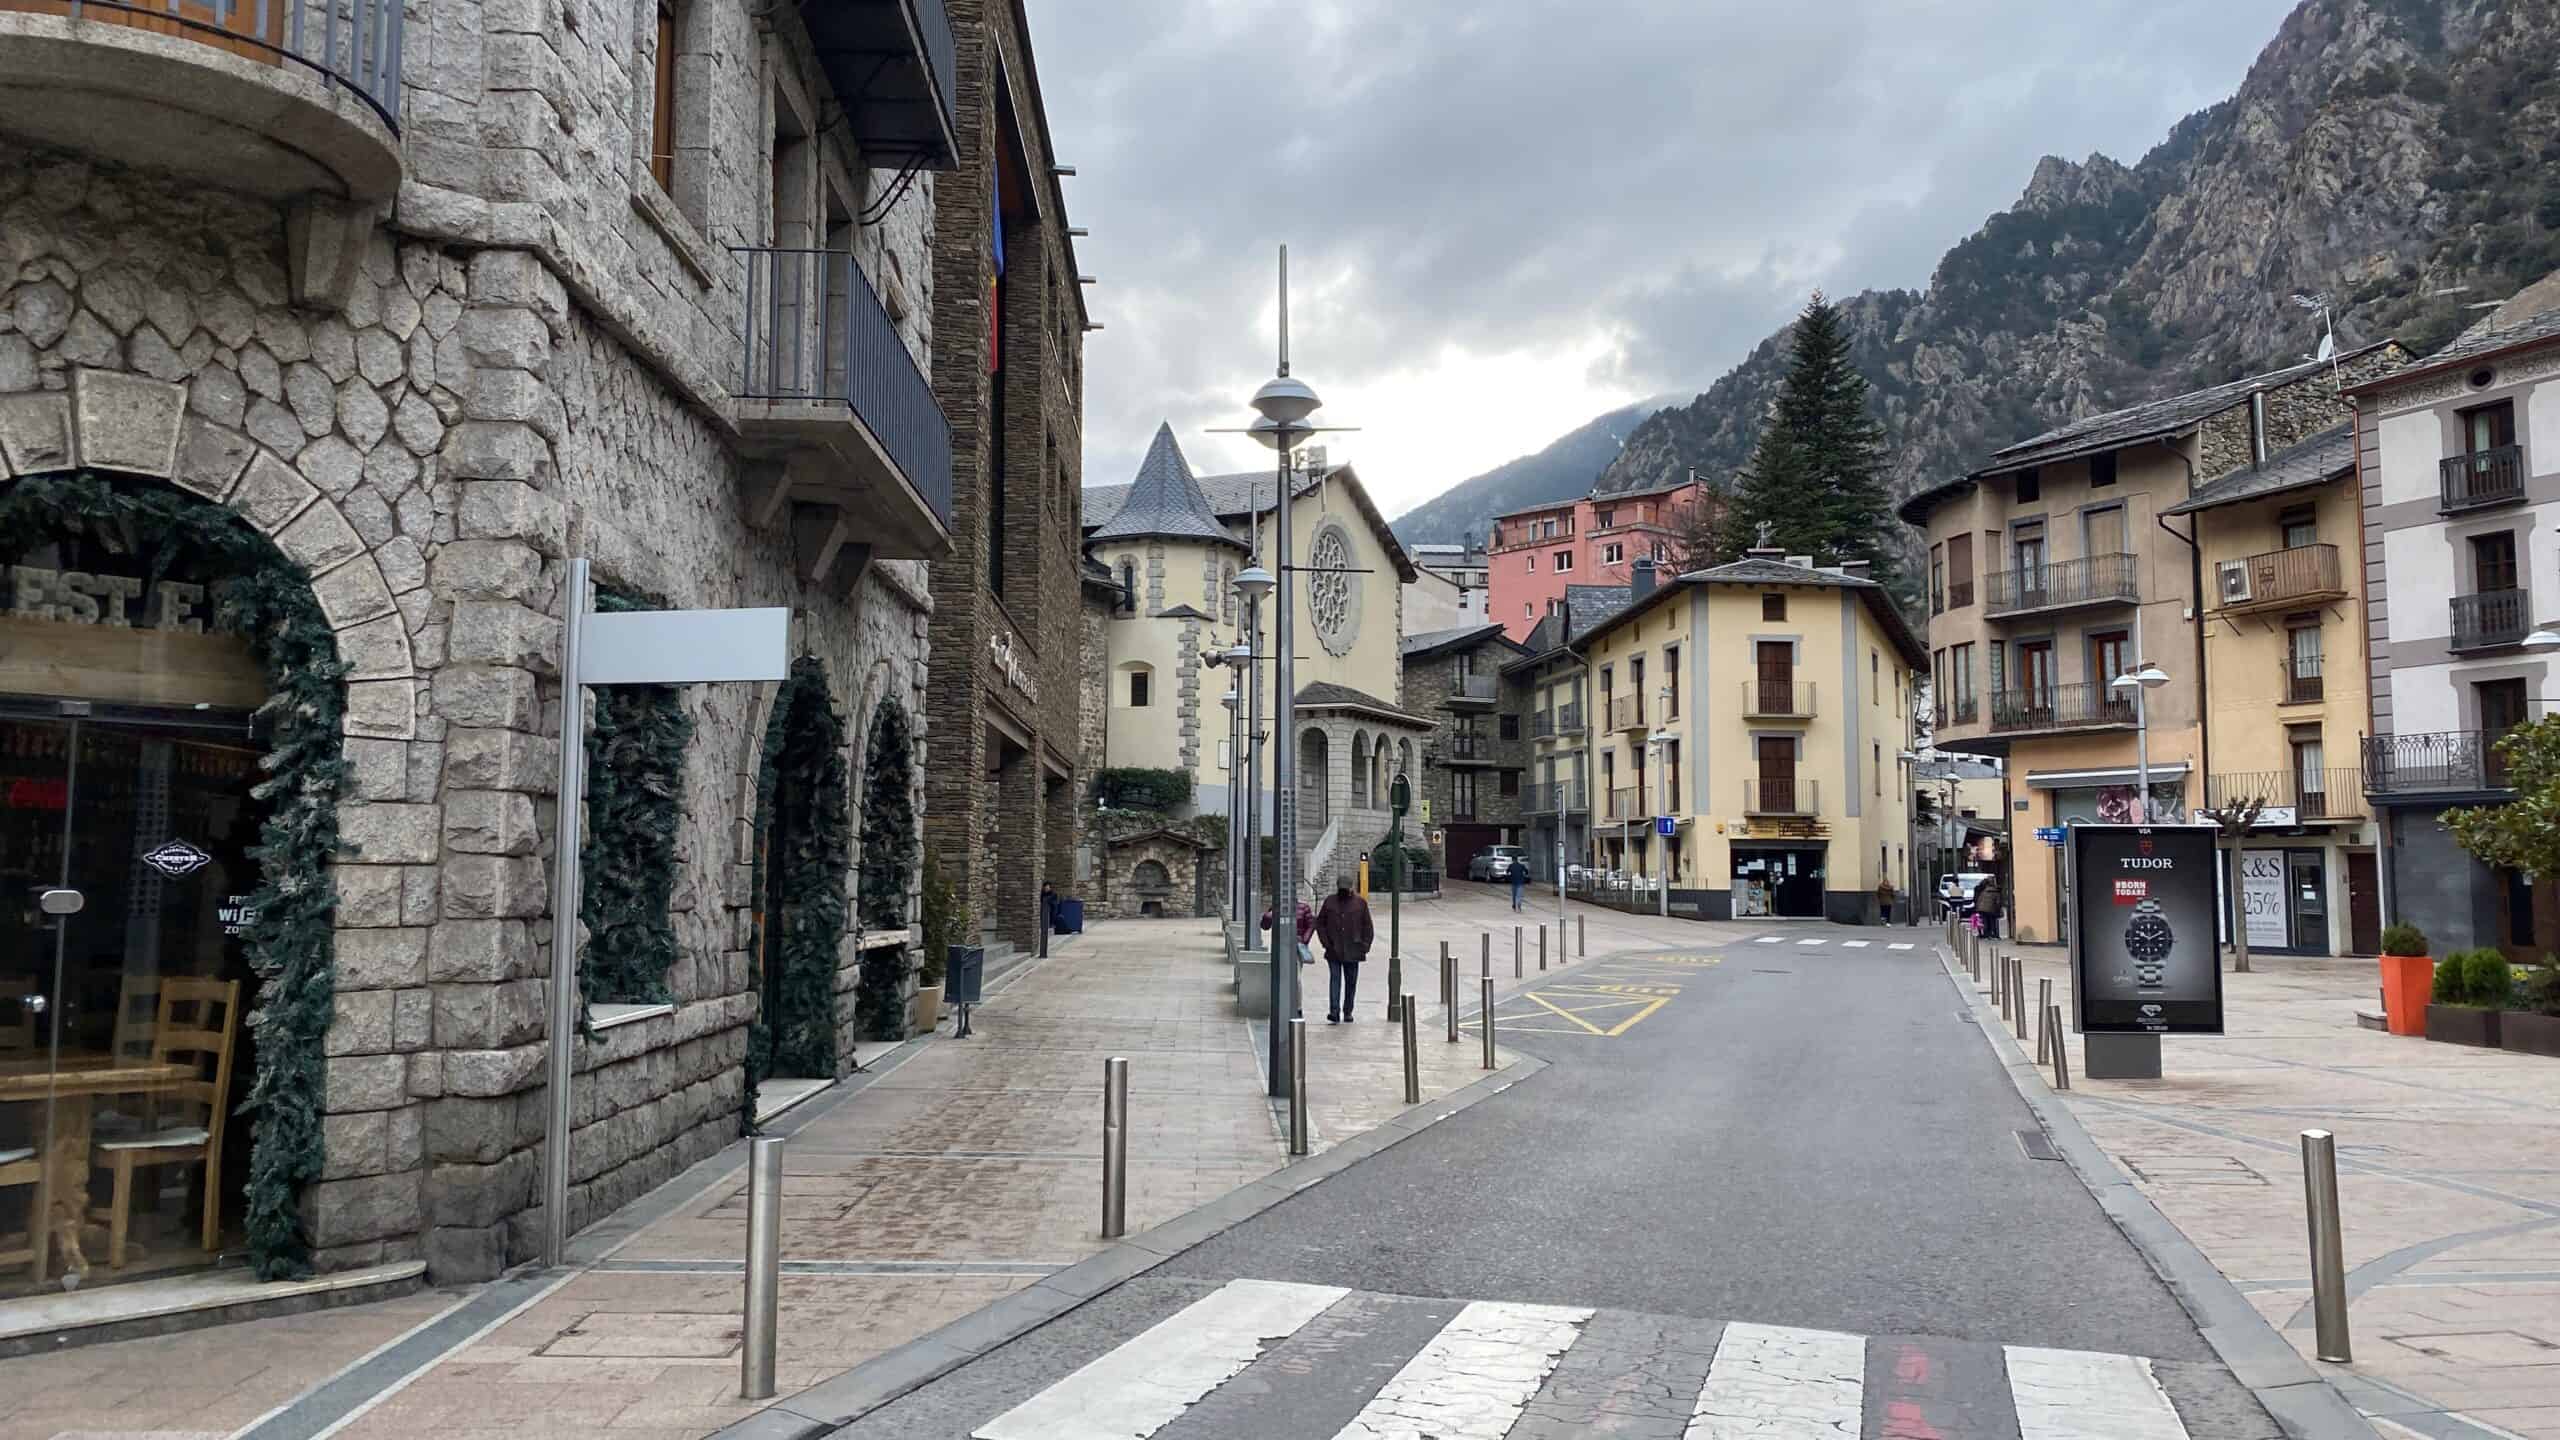 Andorra is a safe and clean city